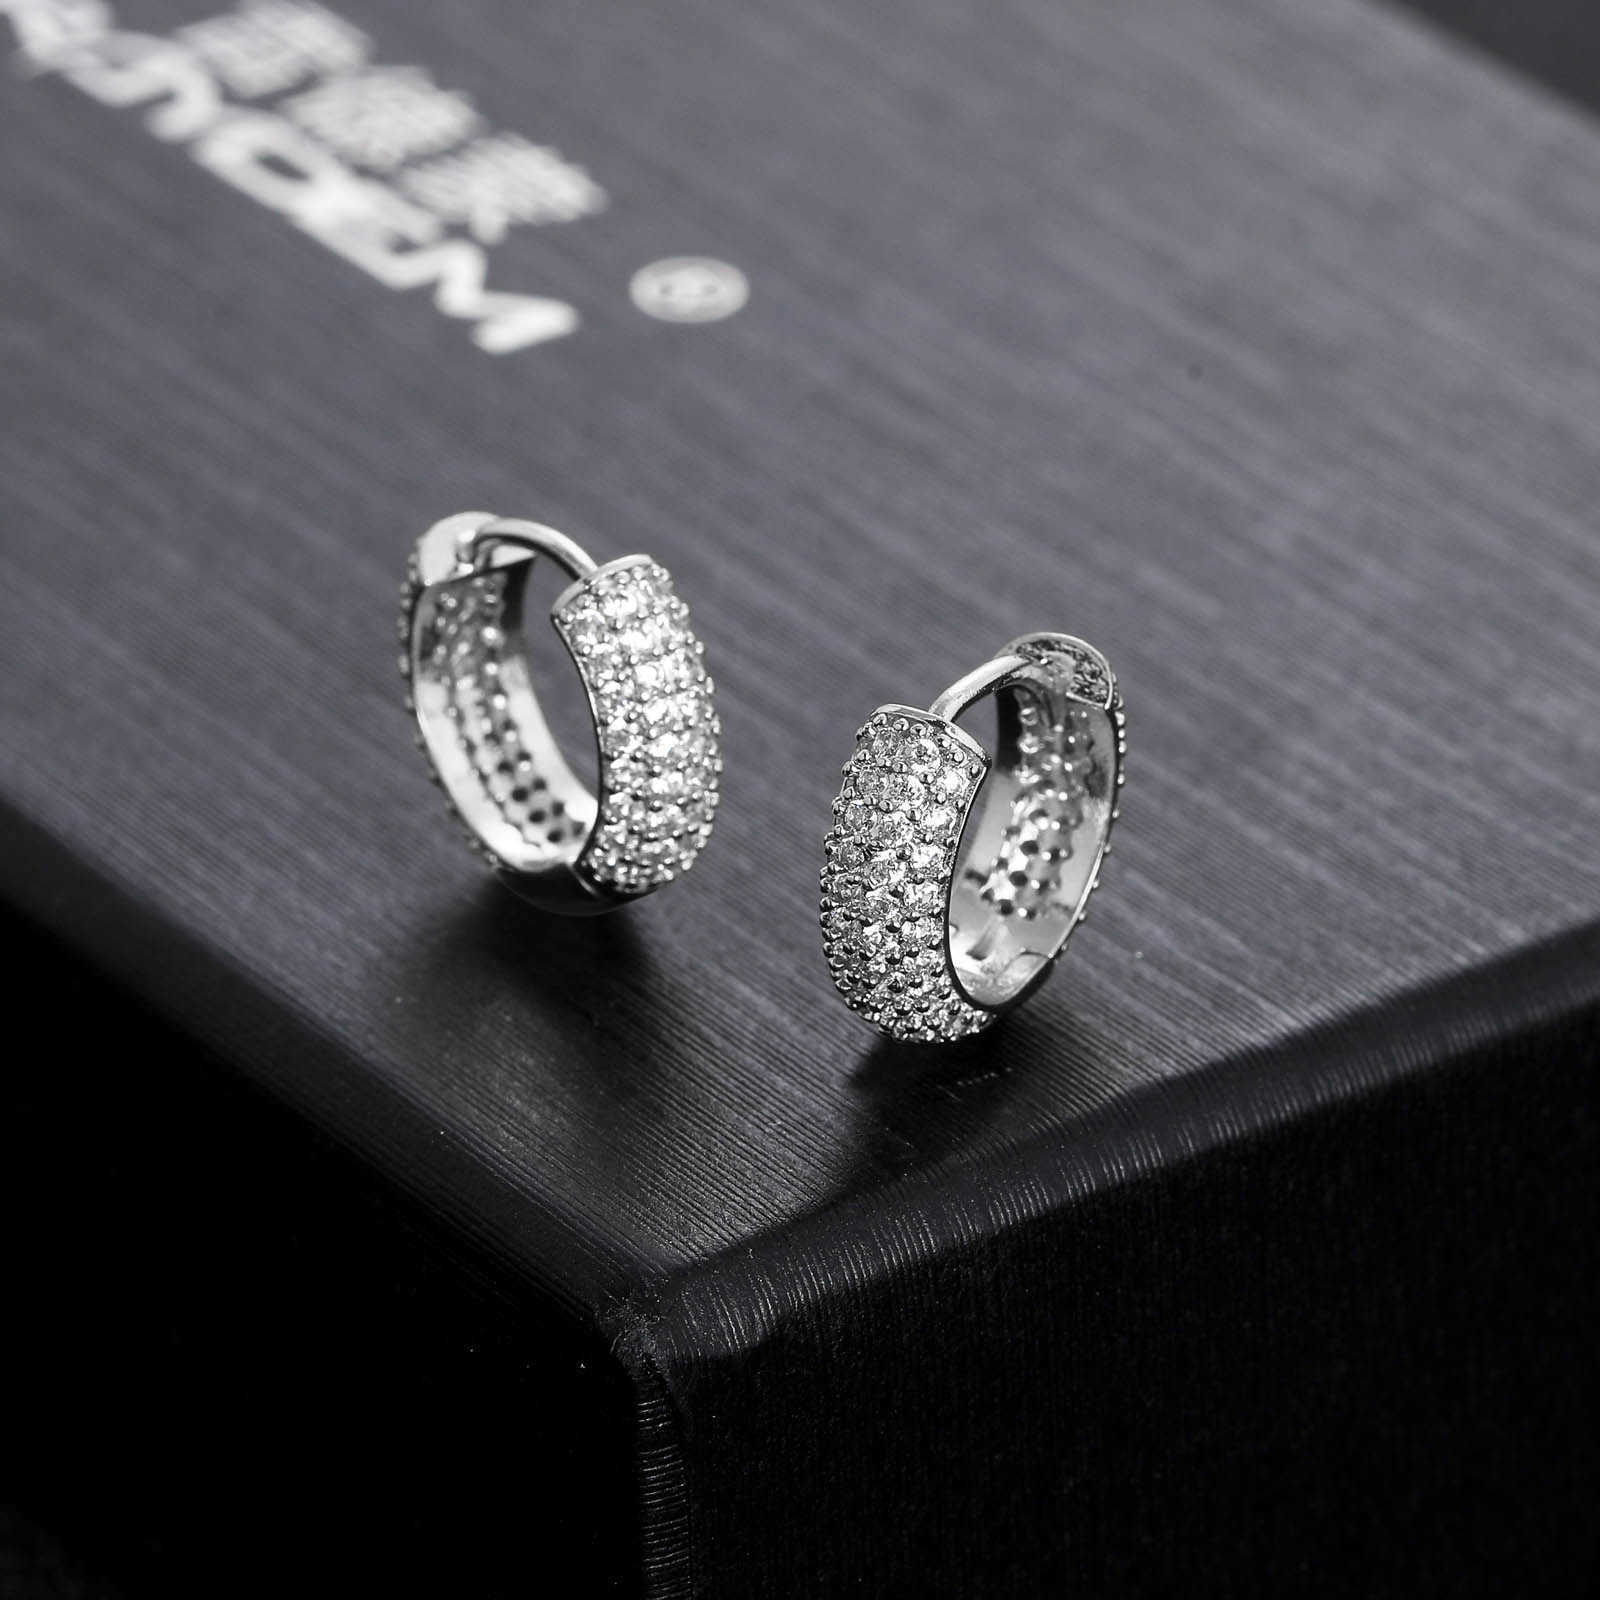 New Fashion Hie Earring Hip-hop Round Hoop Earrings Trend Brand Personalized Micro Iced Out Cubic Zircon Mens Accessories 3A CZ Stone Ear Jewelry for Men Women